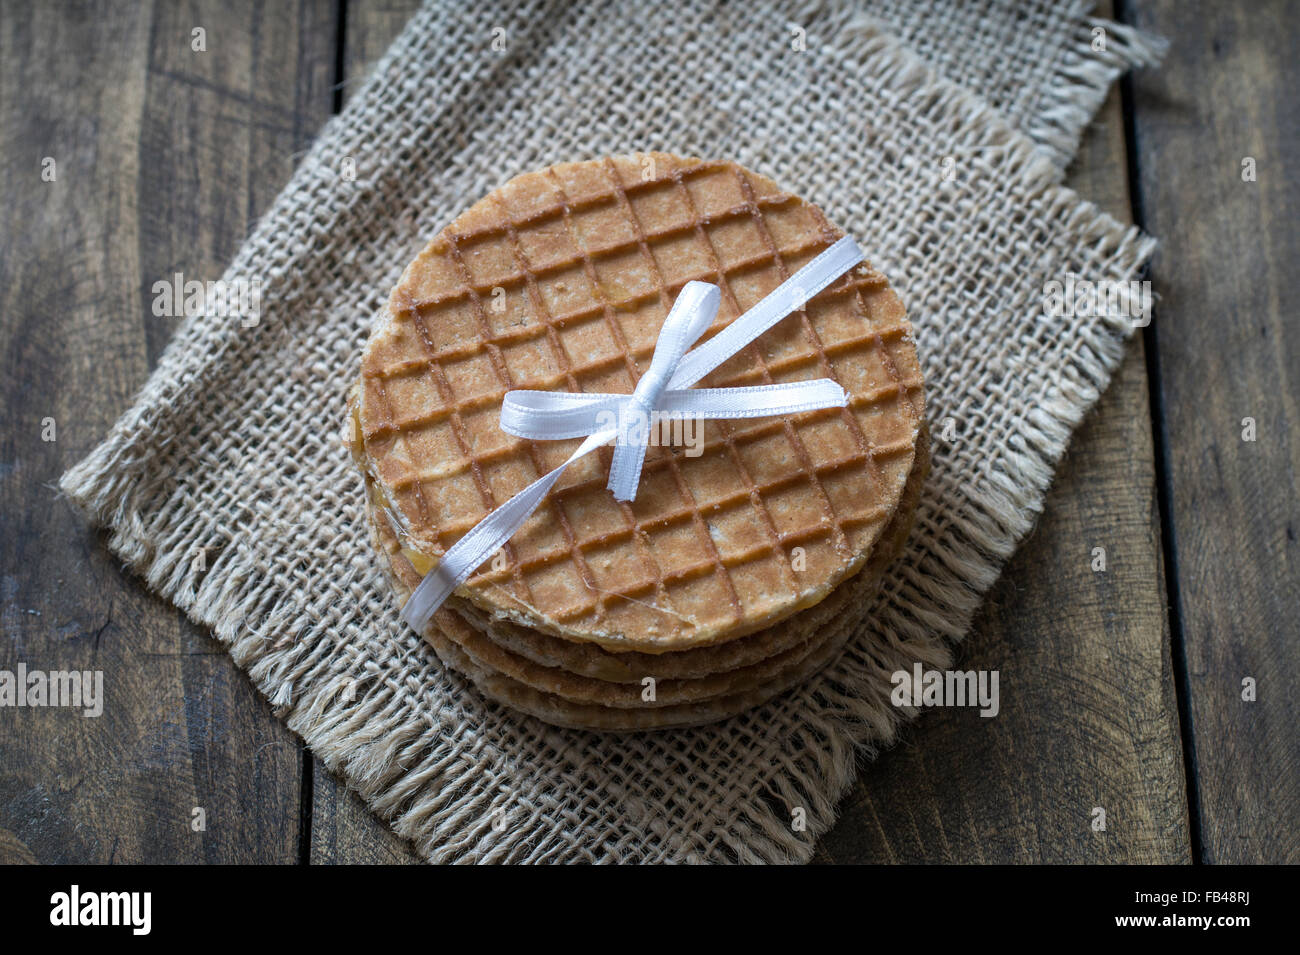 dutch waffles with caramel on wooden background, close up Stock Photo